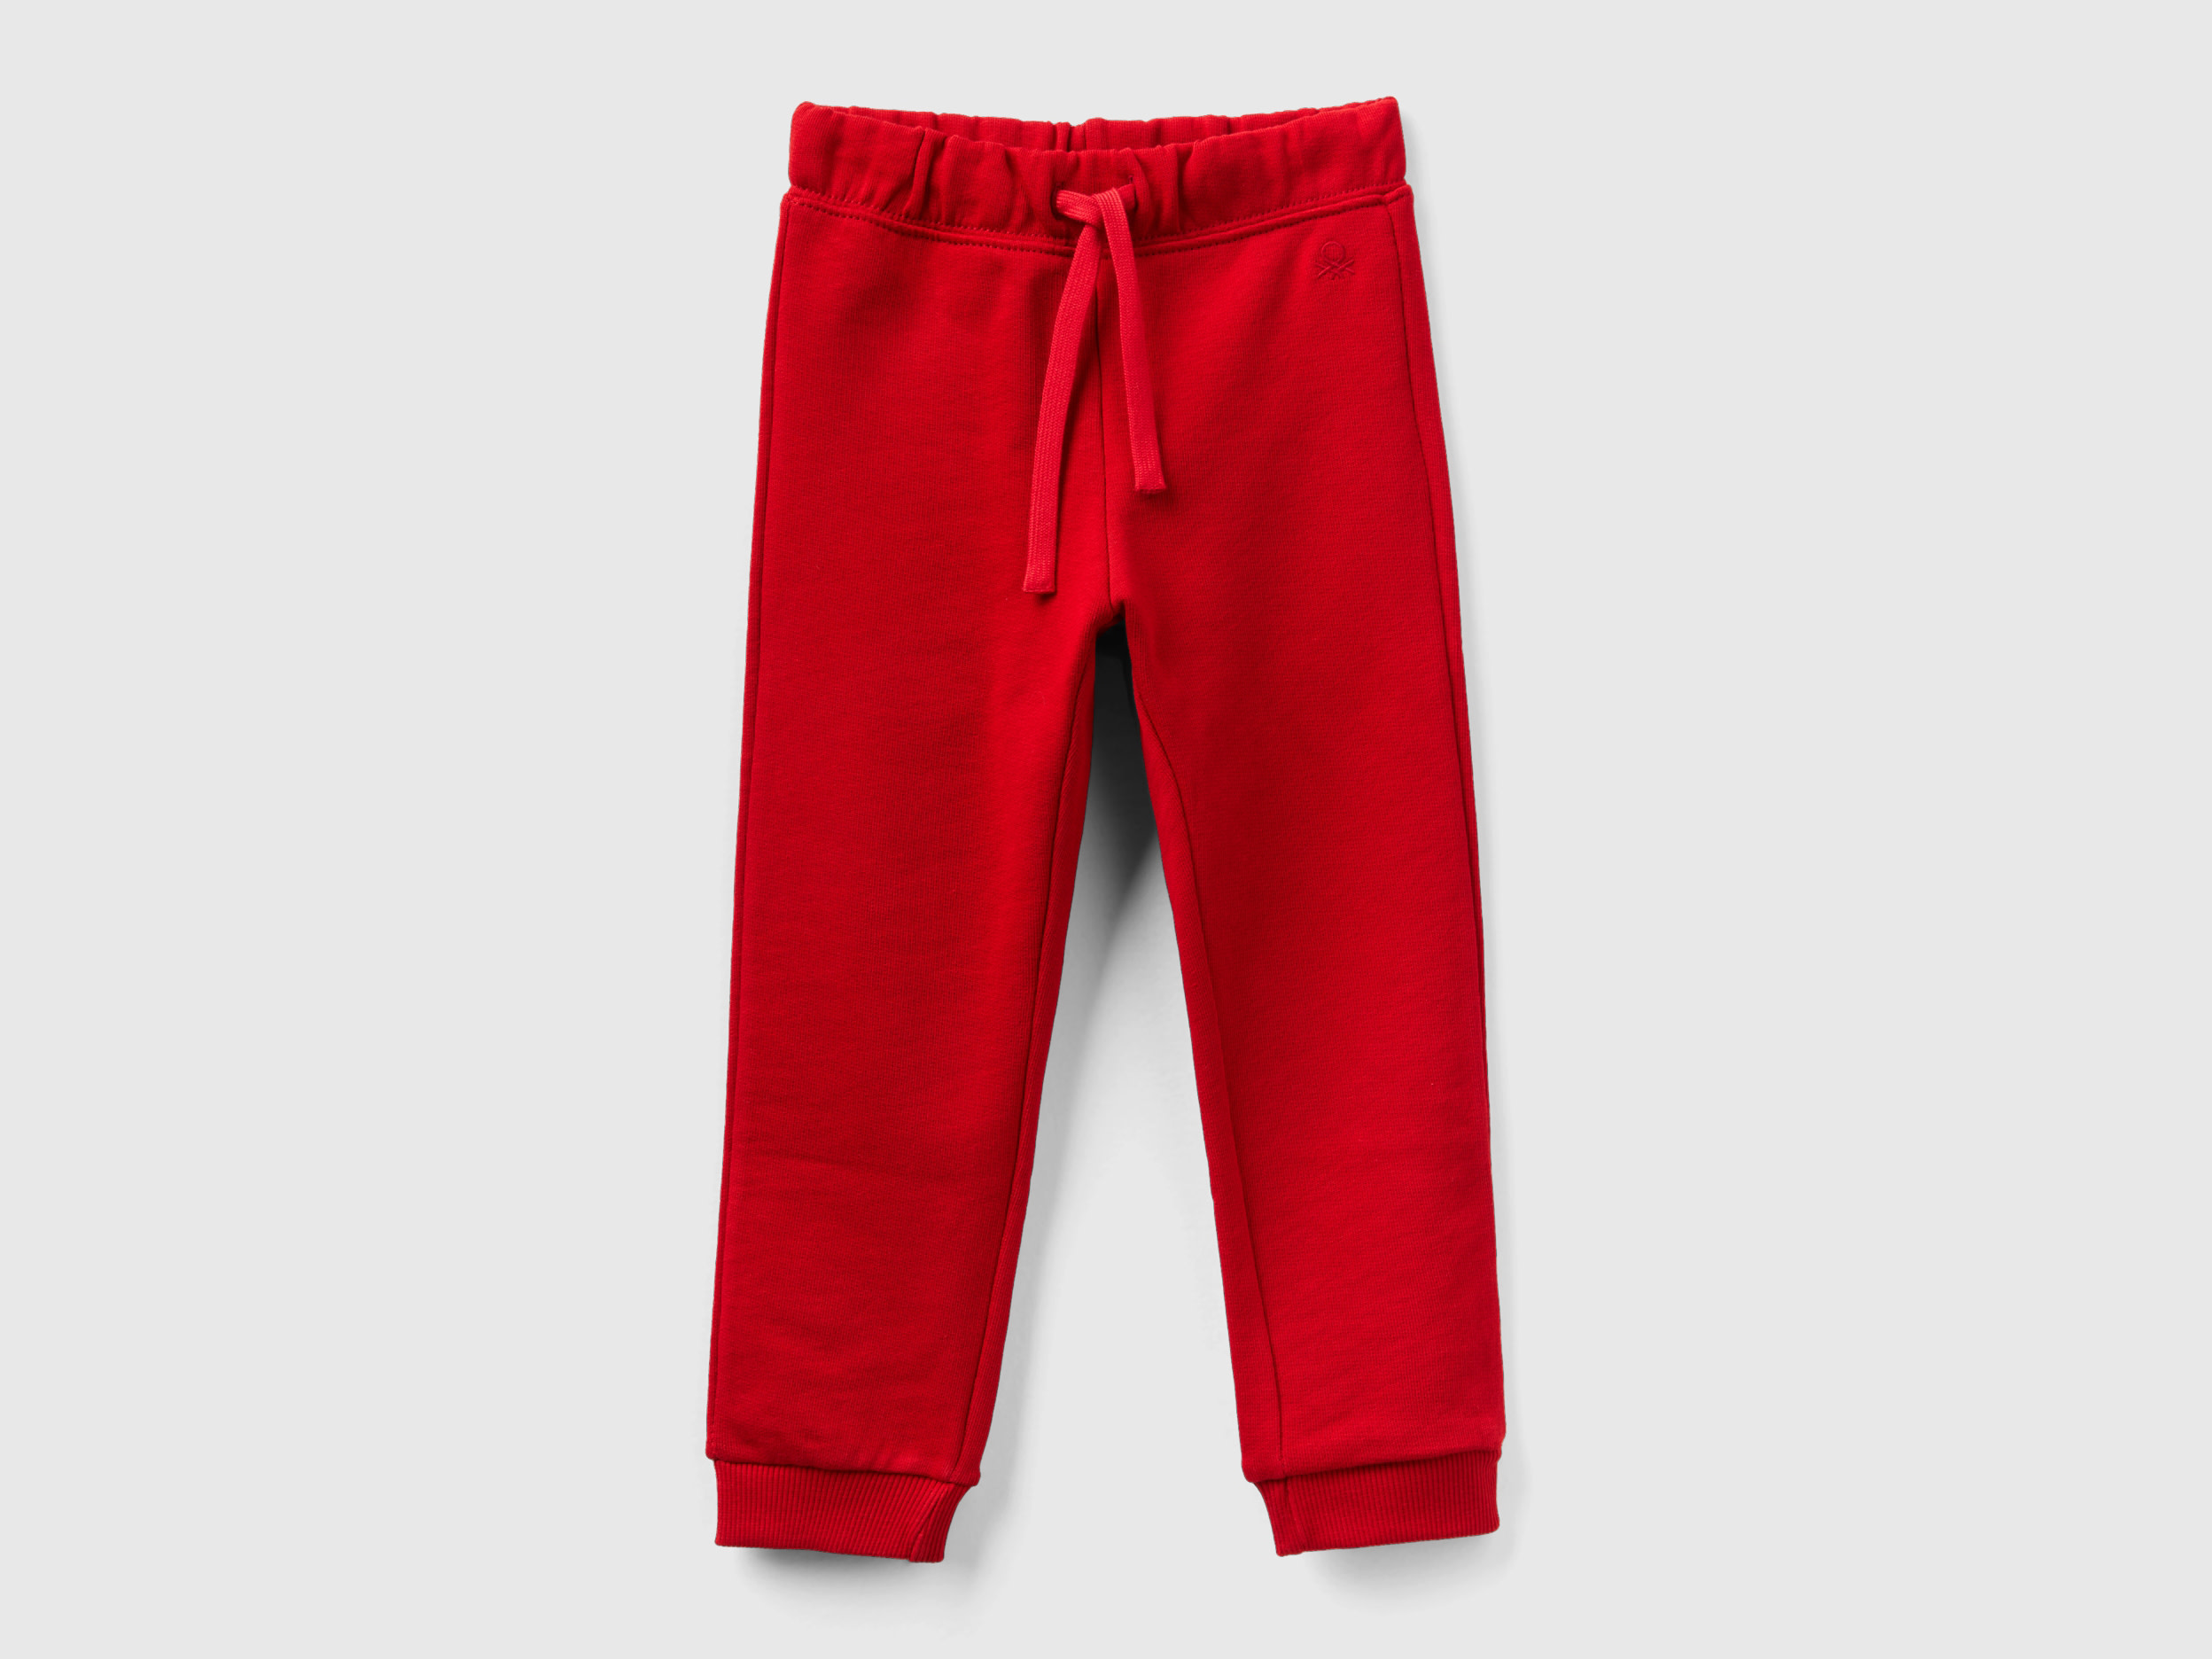 Benetton, Sweatpants In Organic Cotton, size 18-24, Red, Kids